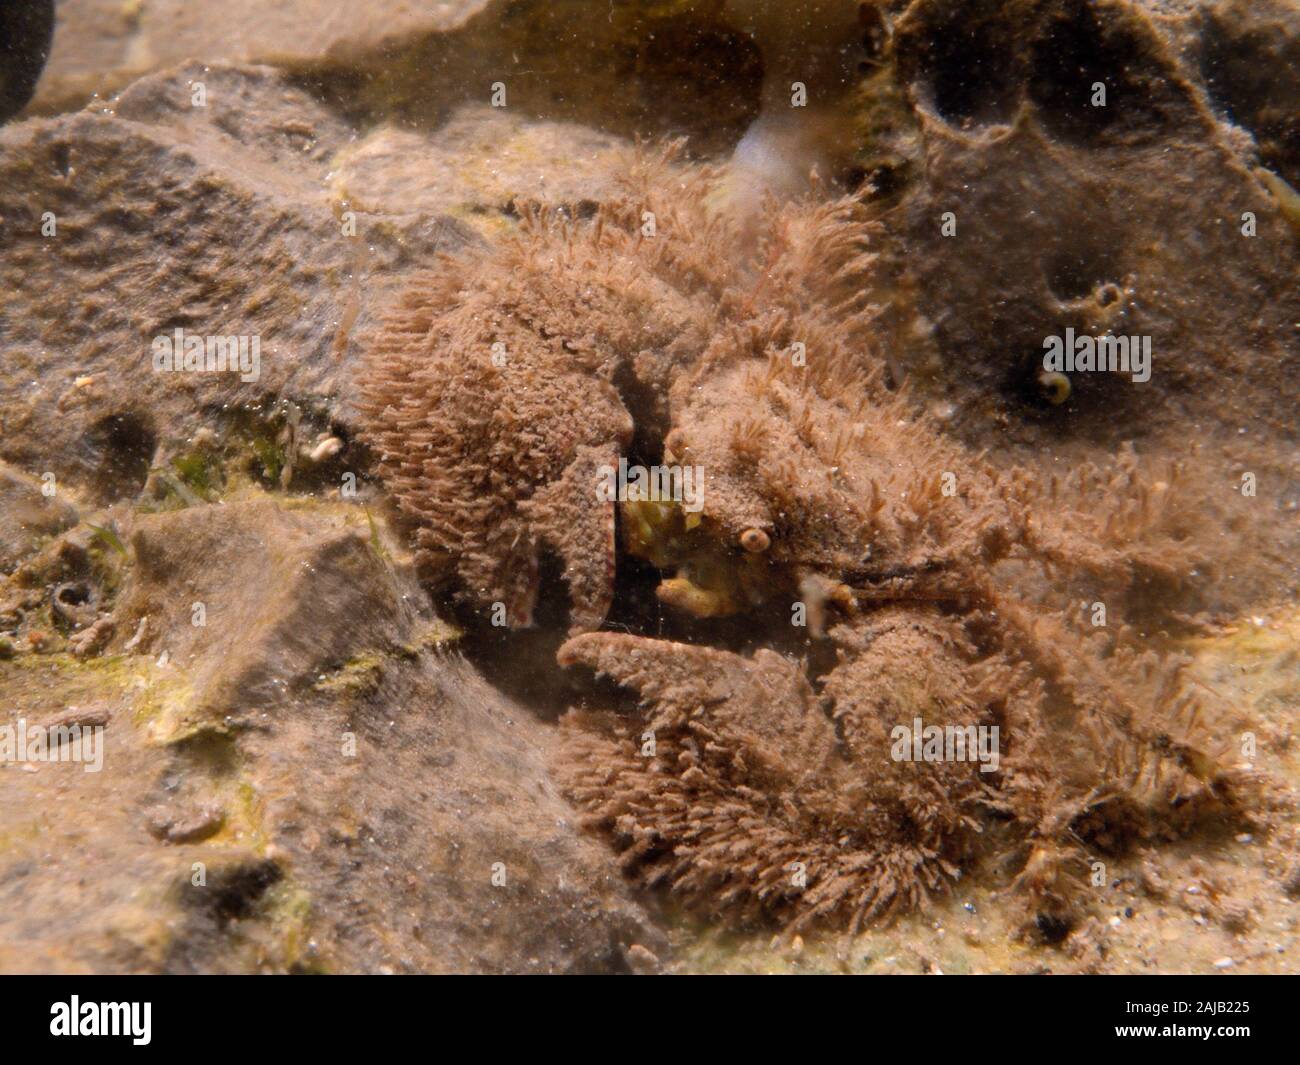 Broad-clawed porcelain crab (Porcellana platycheles) well camouflaged in a rock pool, The Gower, Wales, UK, August. Stock Photo